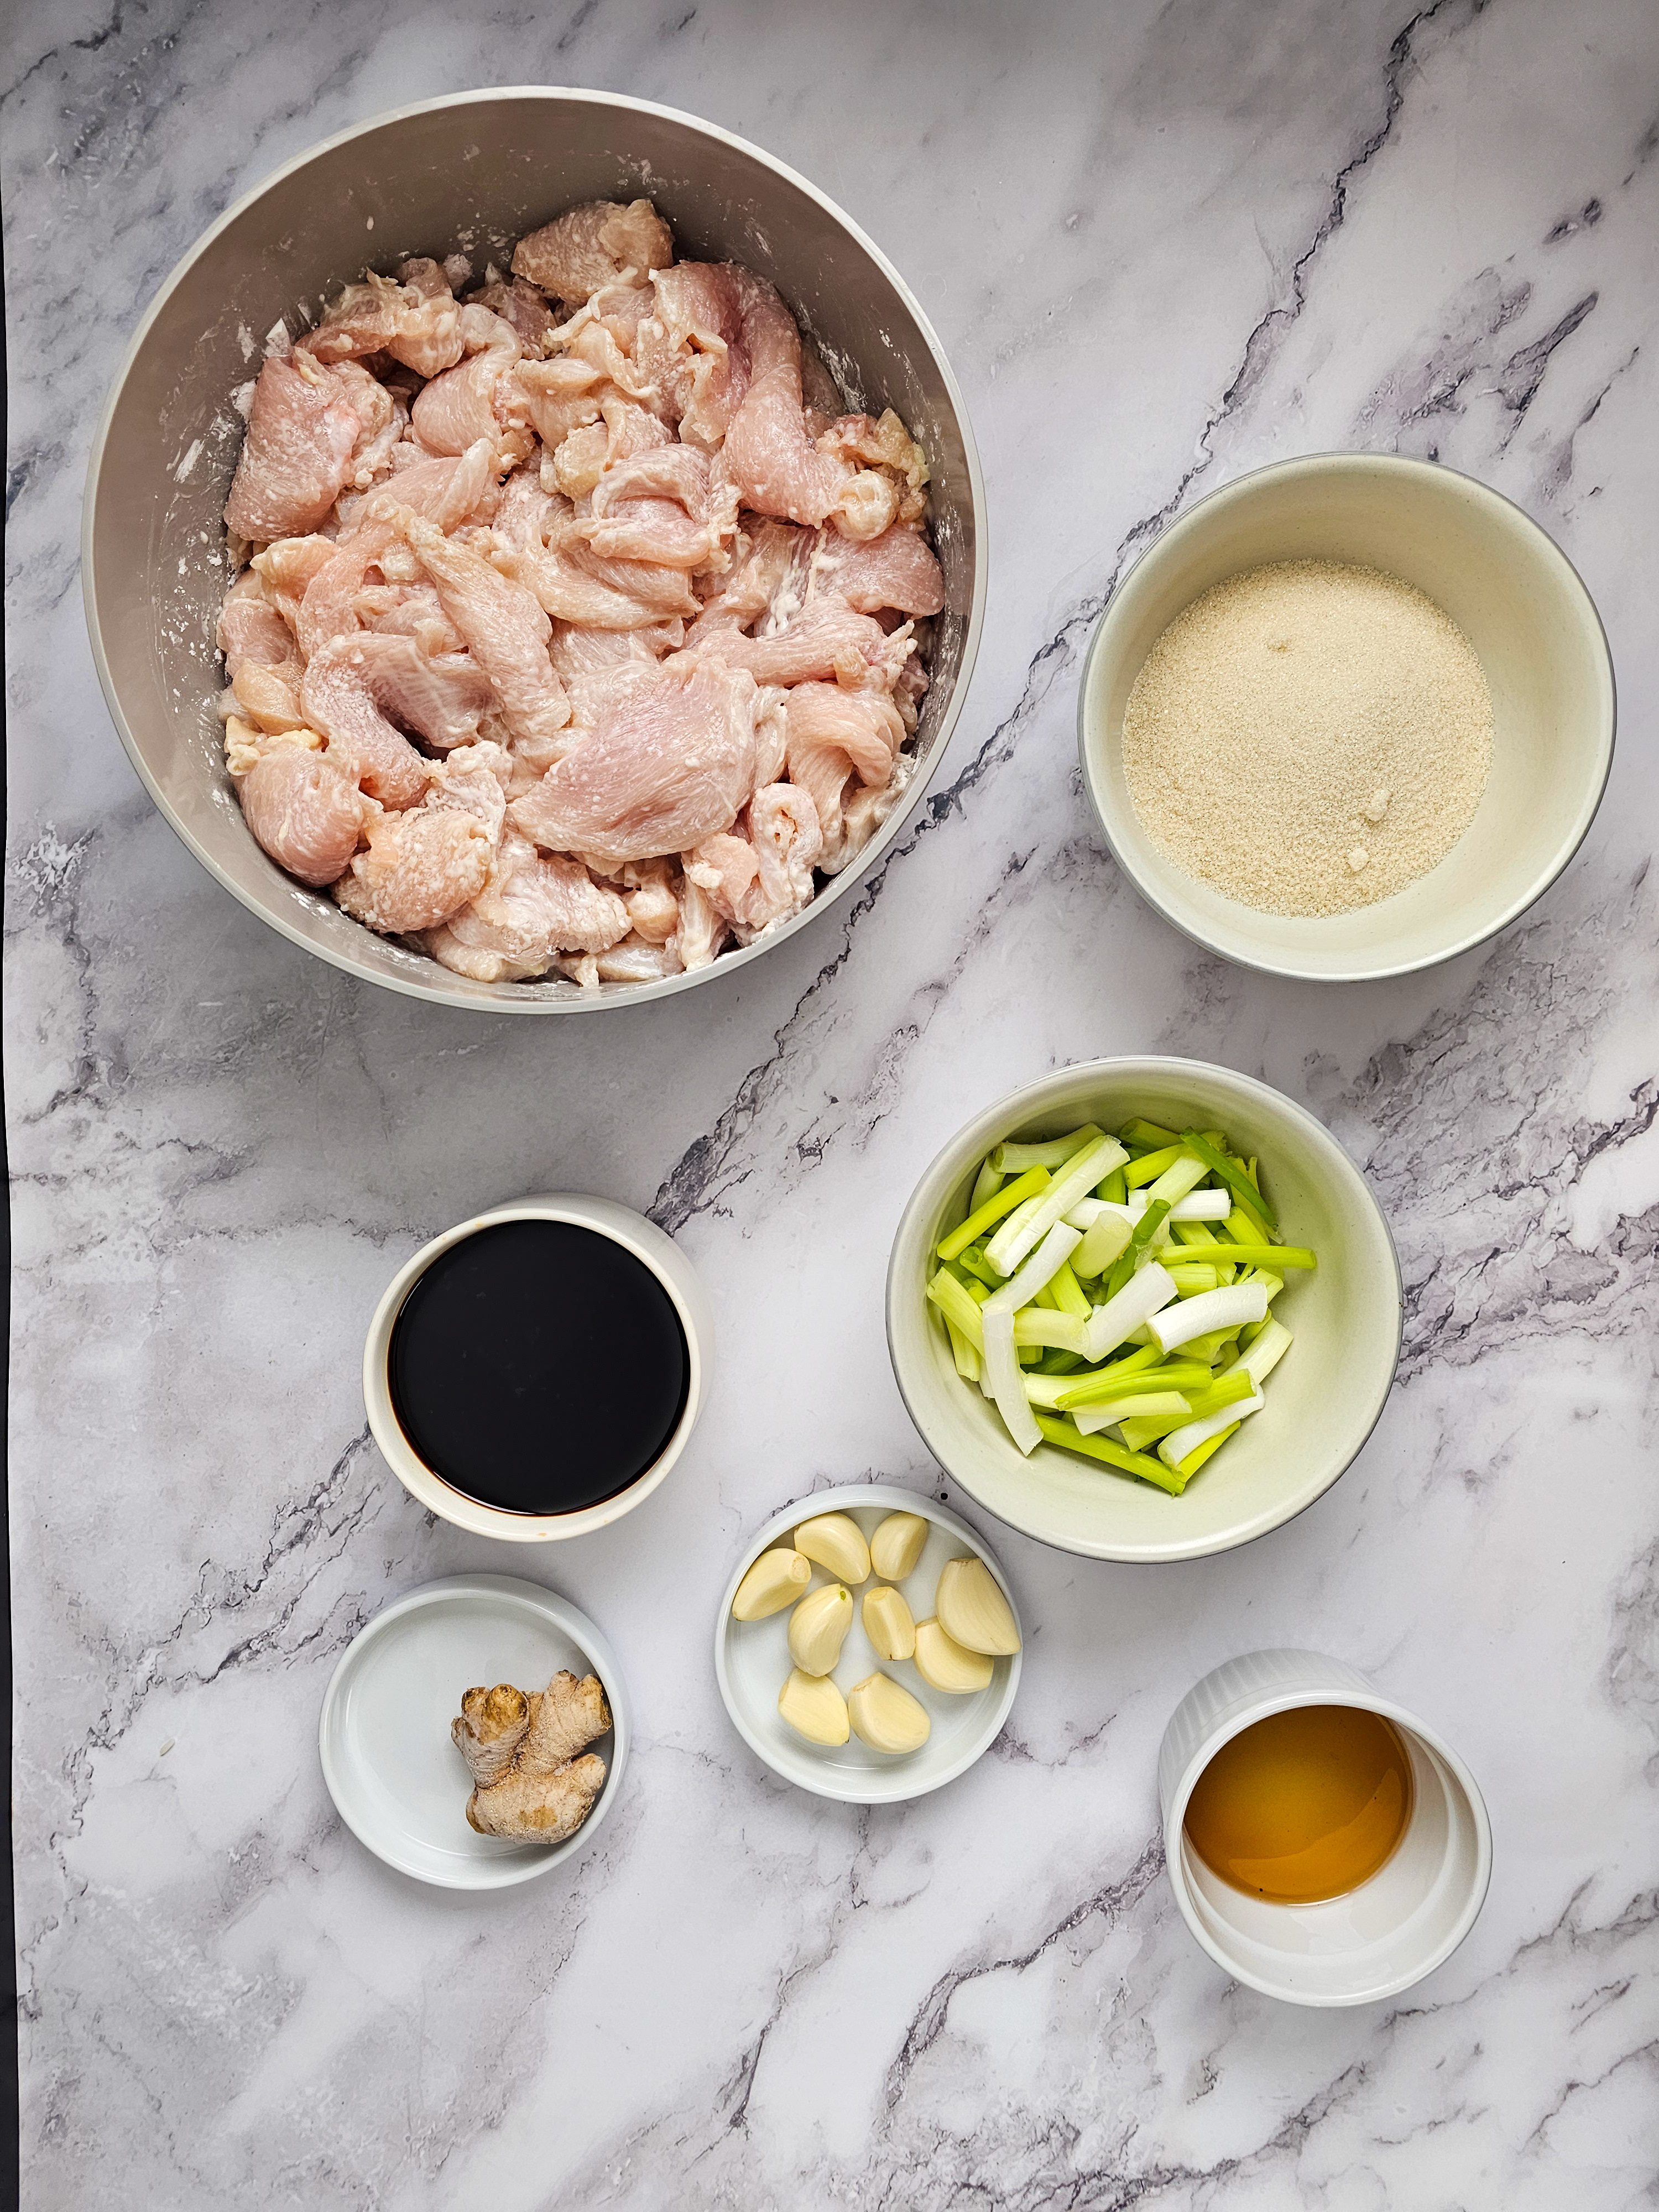 INGREDIENTS FOR MONGOLIAN CHICKEN